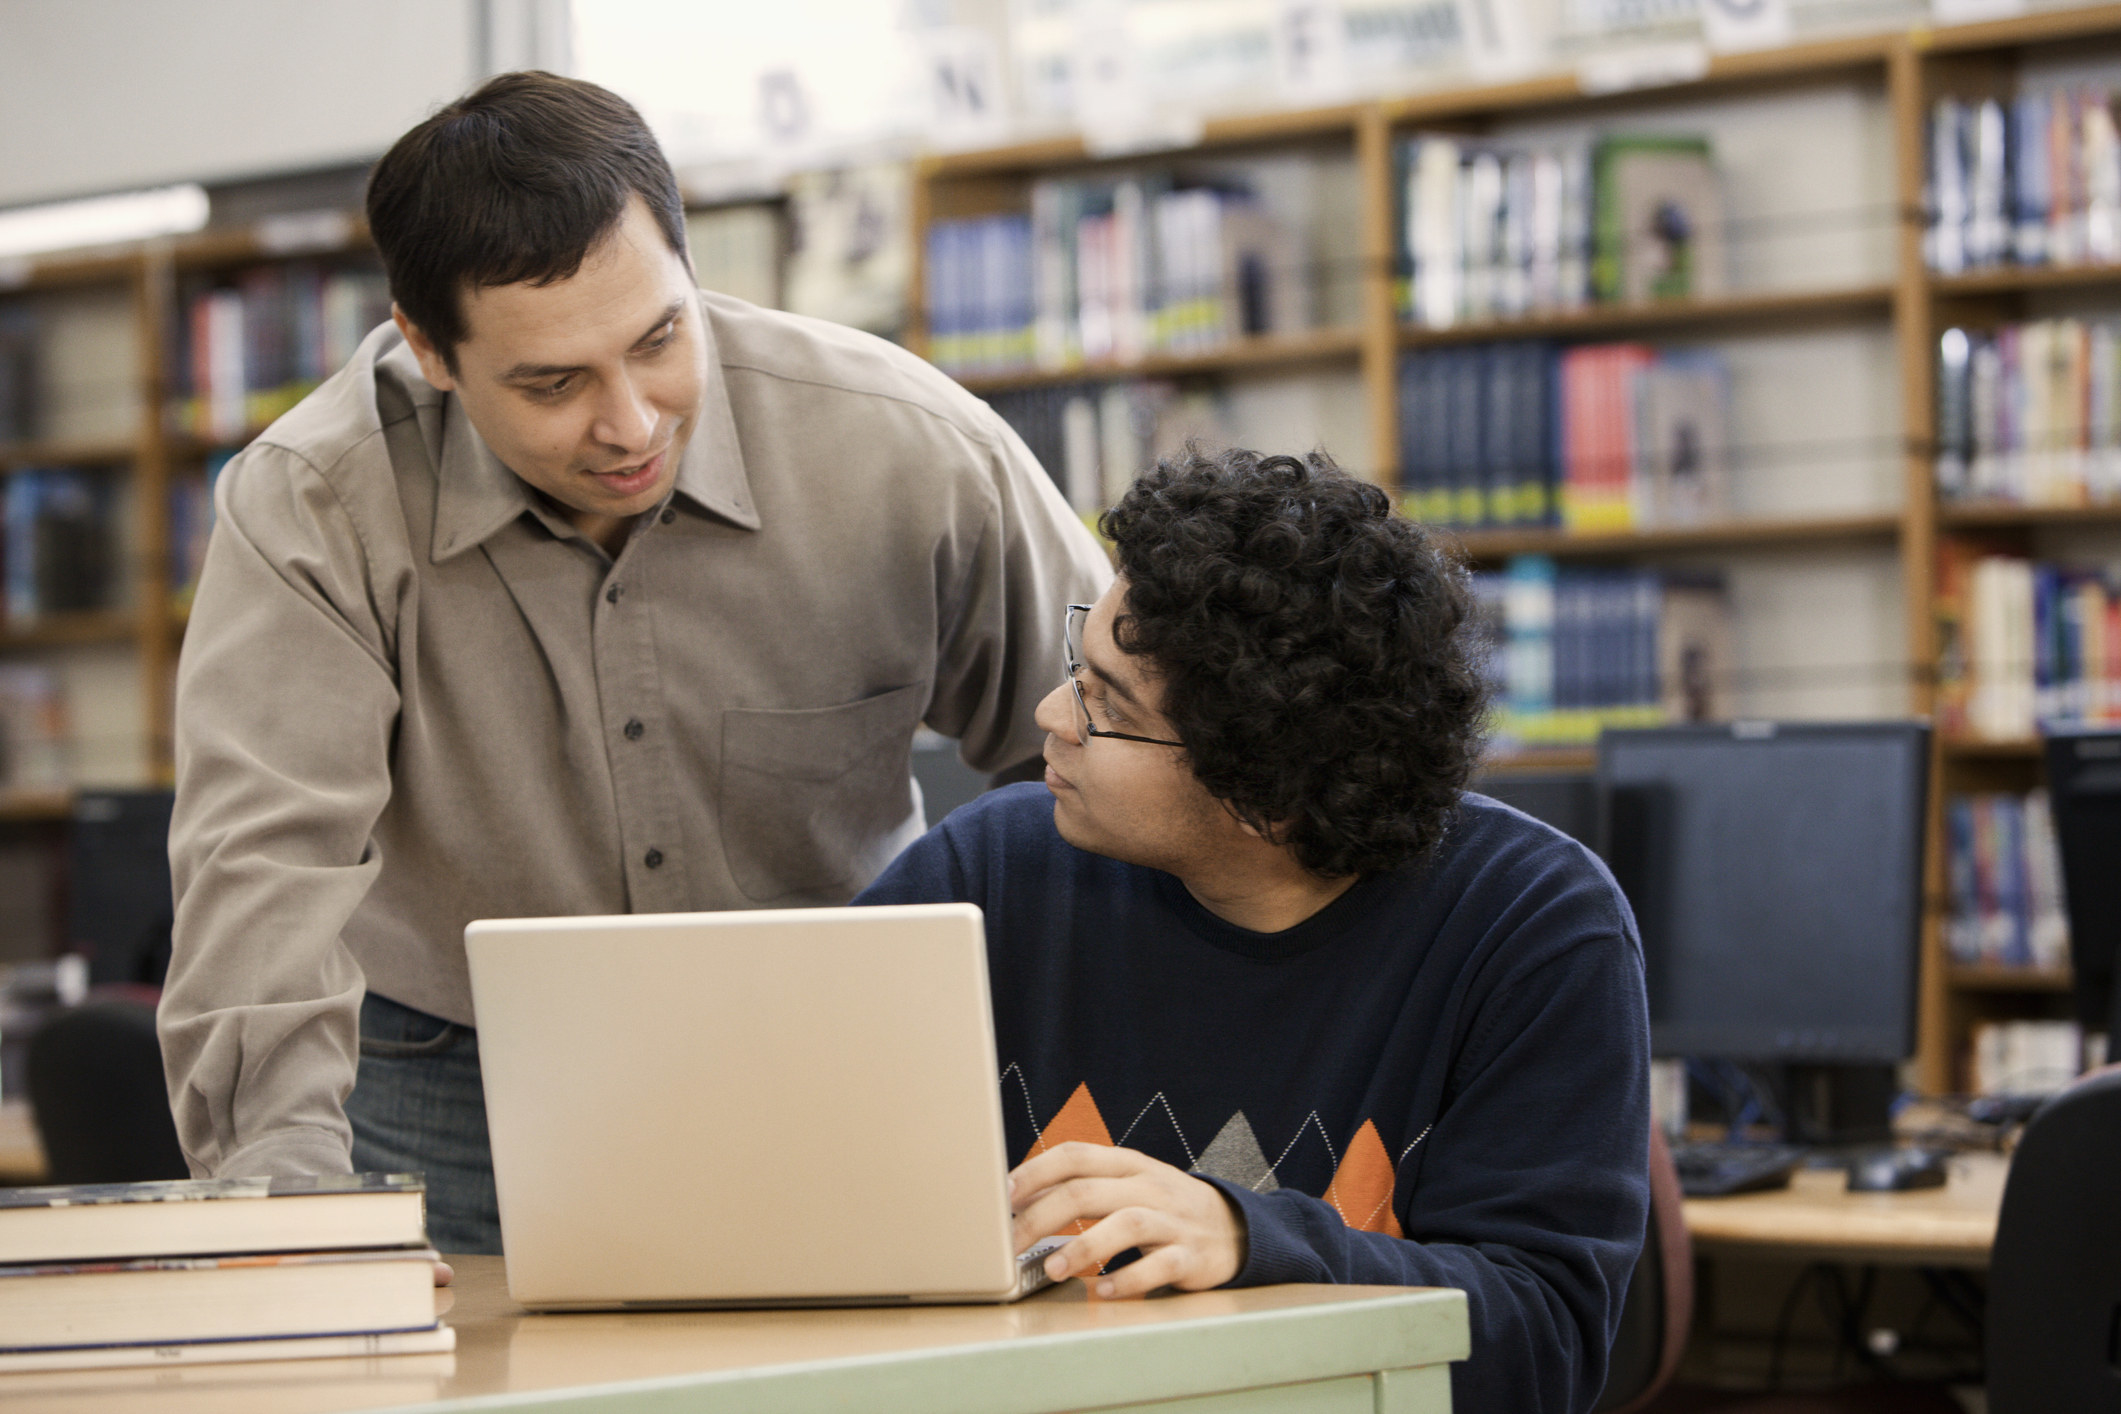 A librarian helps a student working on a laptop